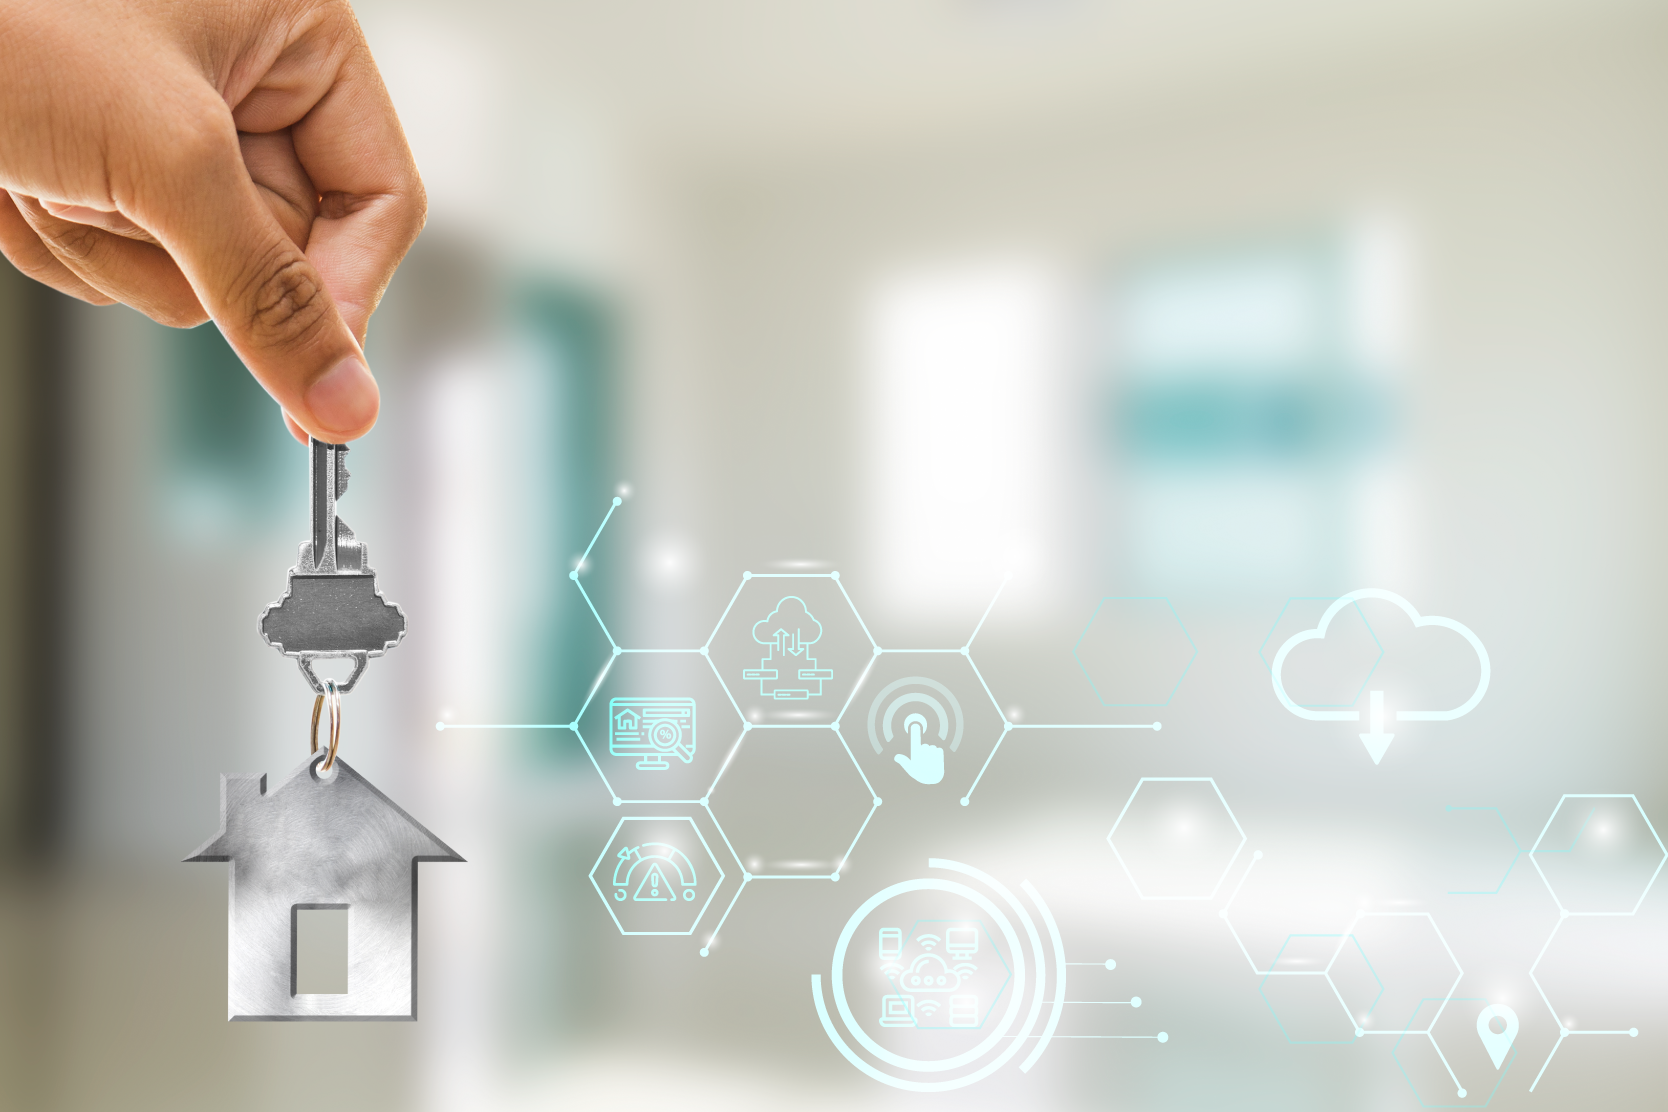 Digital Transformation In Mortgages - How Technology Is Revolutionizing Home Financing